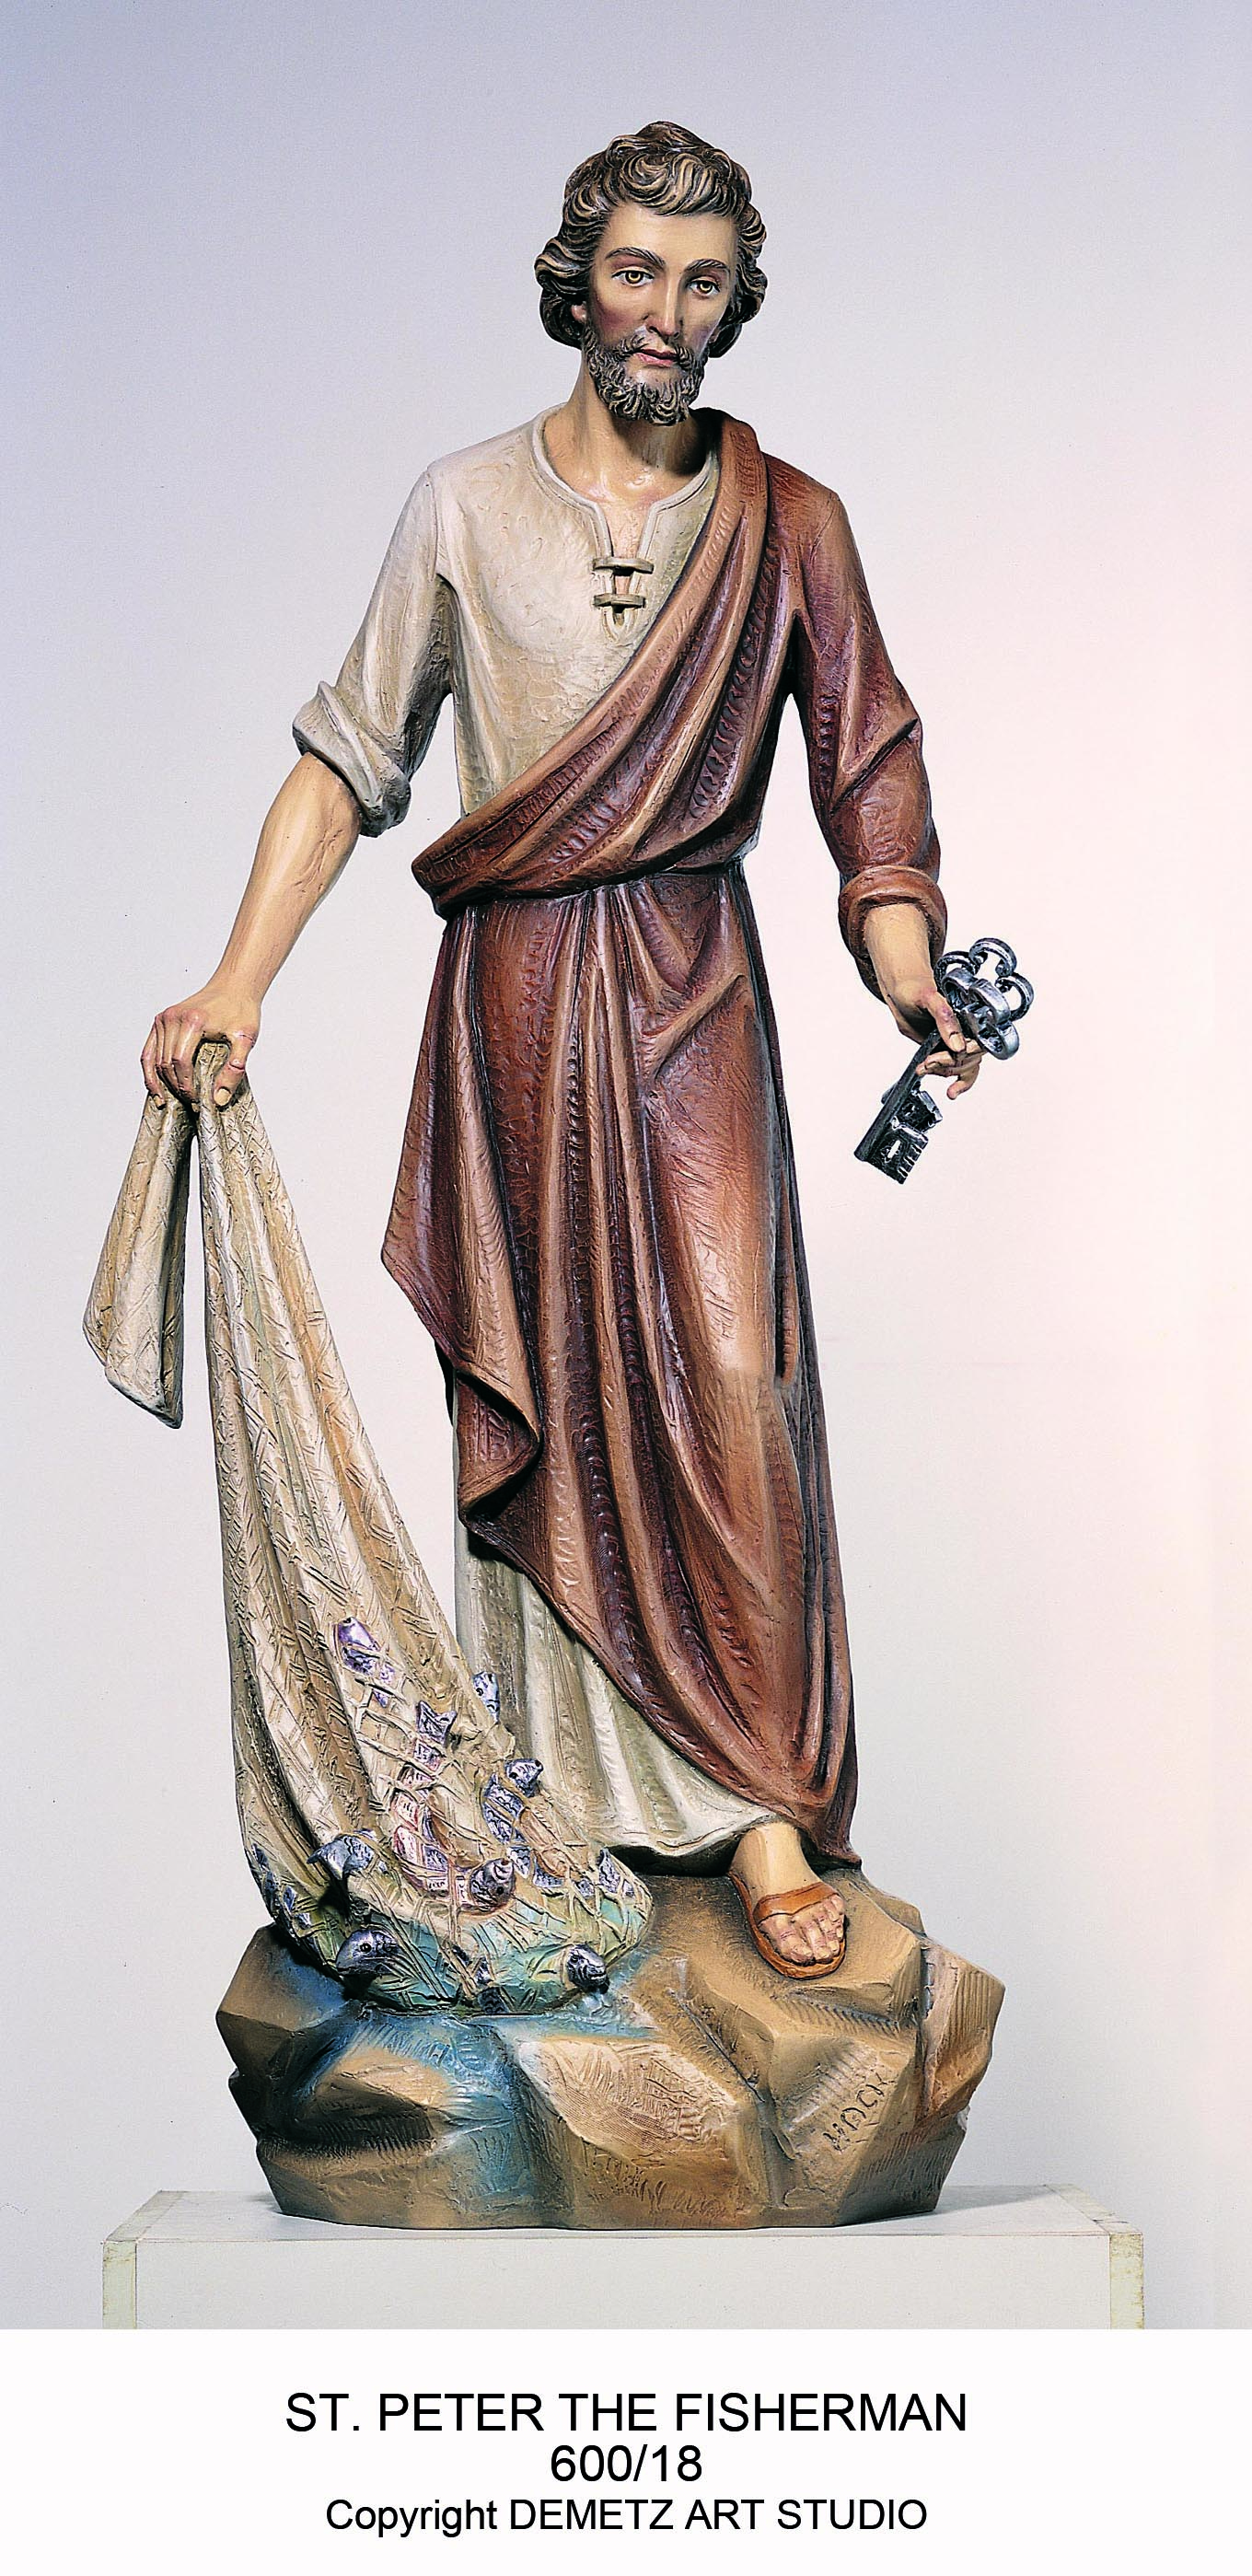 St. Peter the Fisherman Statue in Fiberglass - St. Andrew's Book, Gift